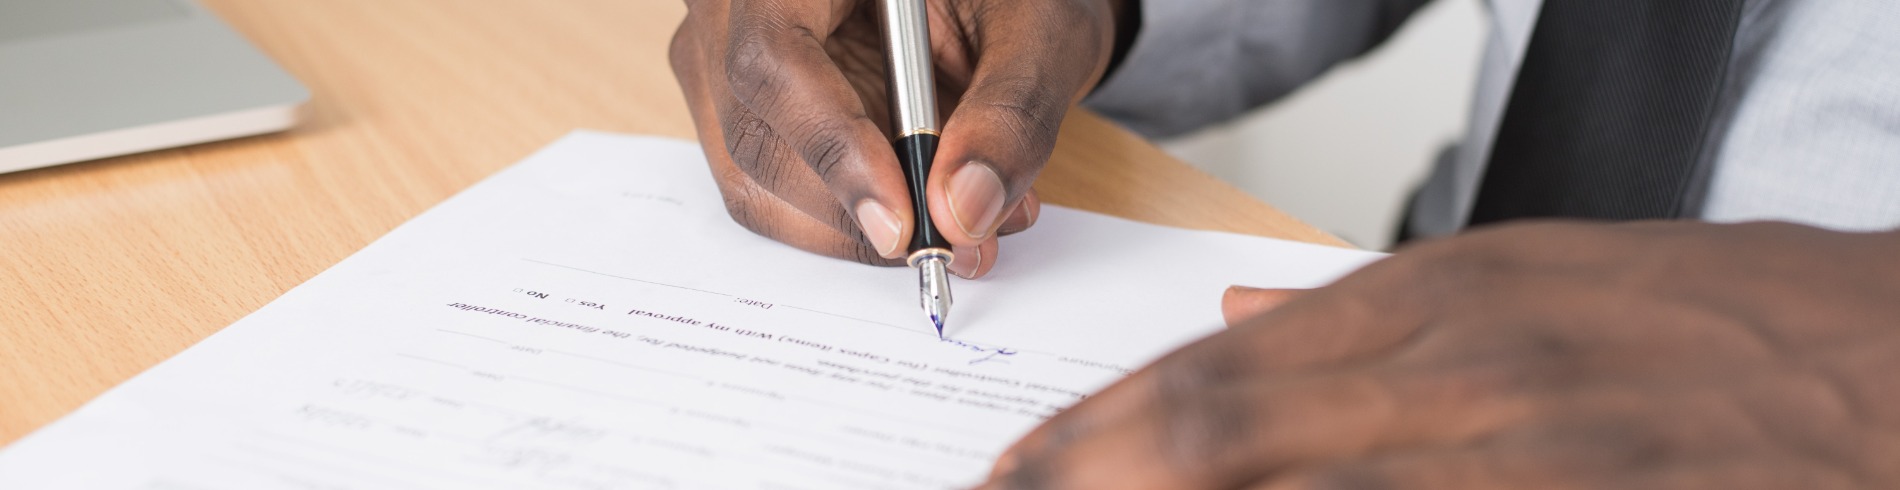 hand signing a form